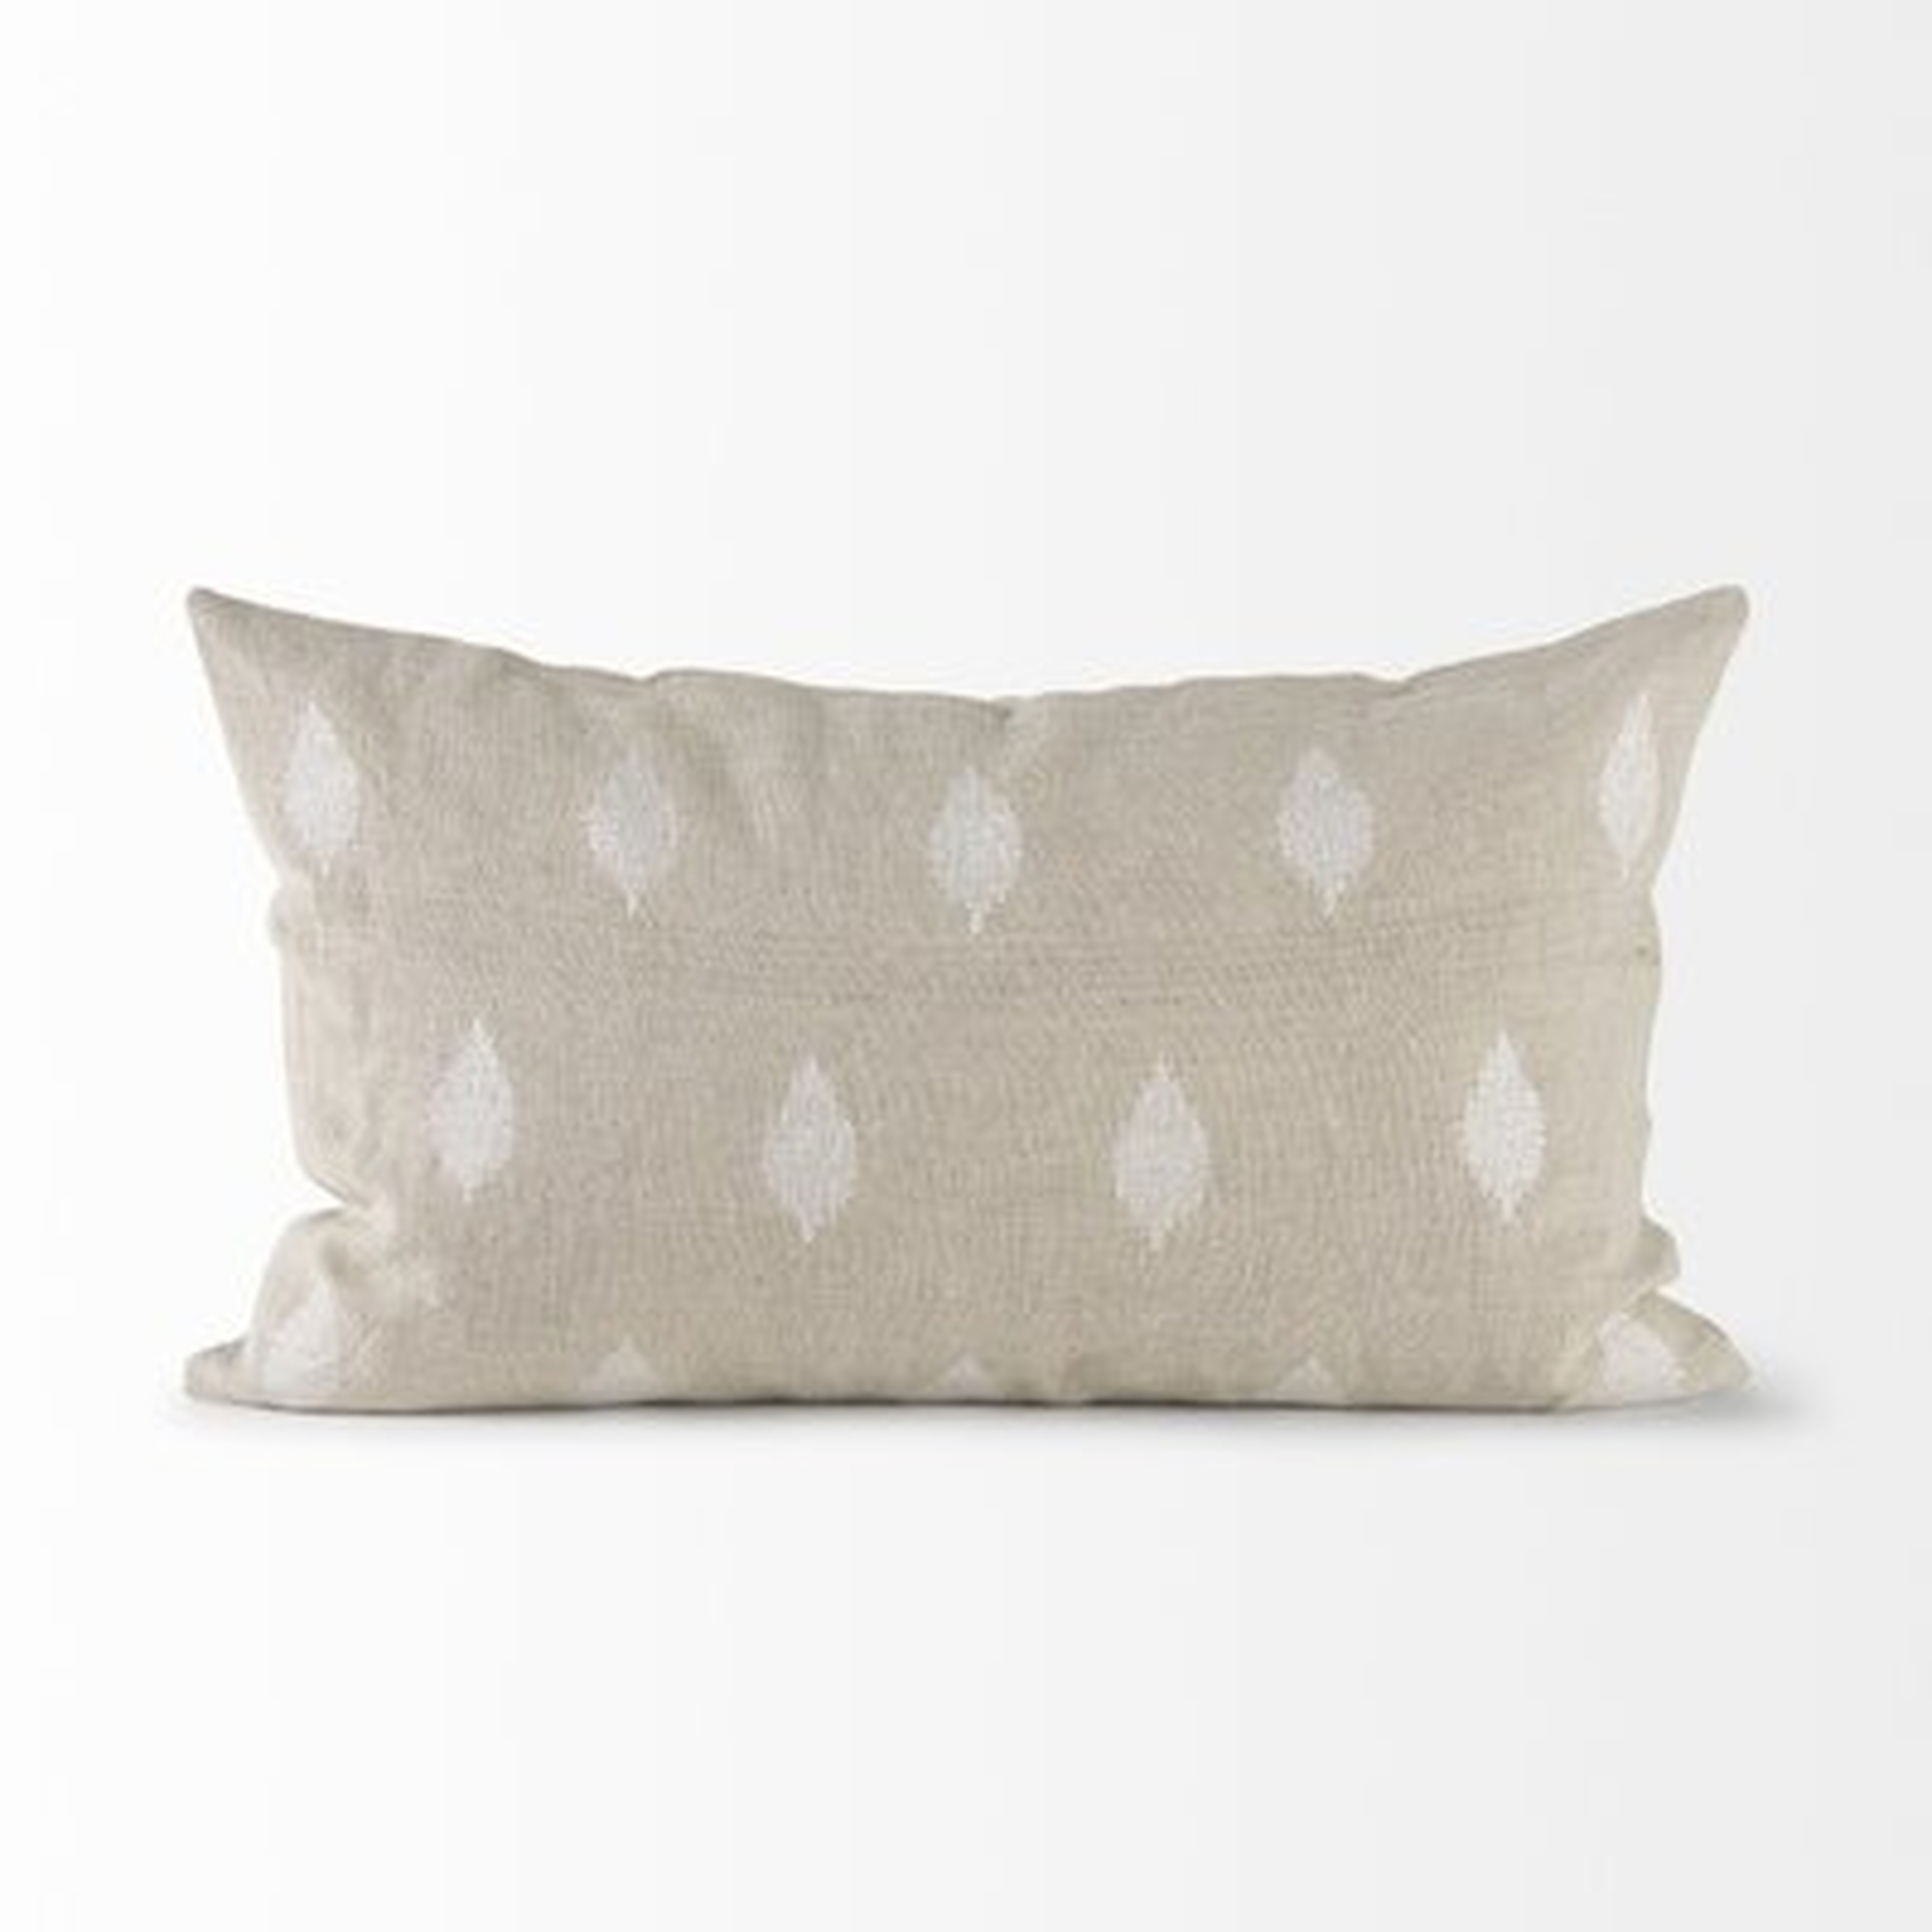 Beige And White Patterned Lumbar Pillow Cover - Wayfair